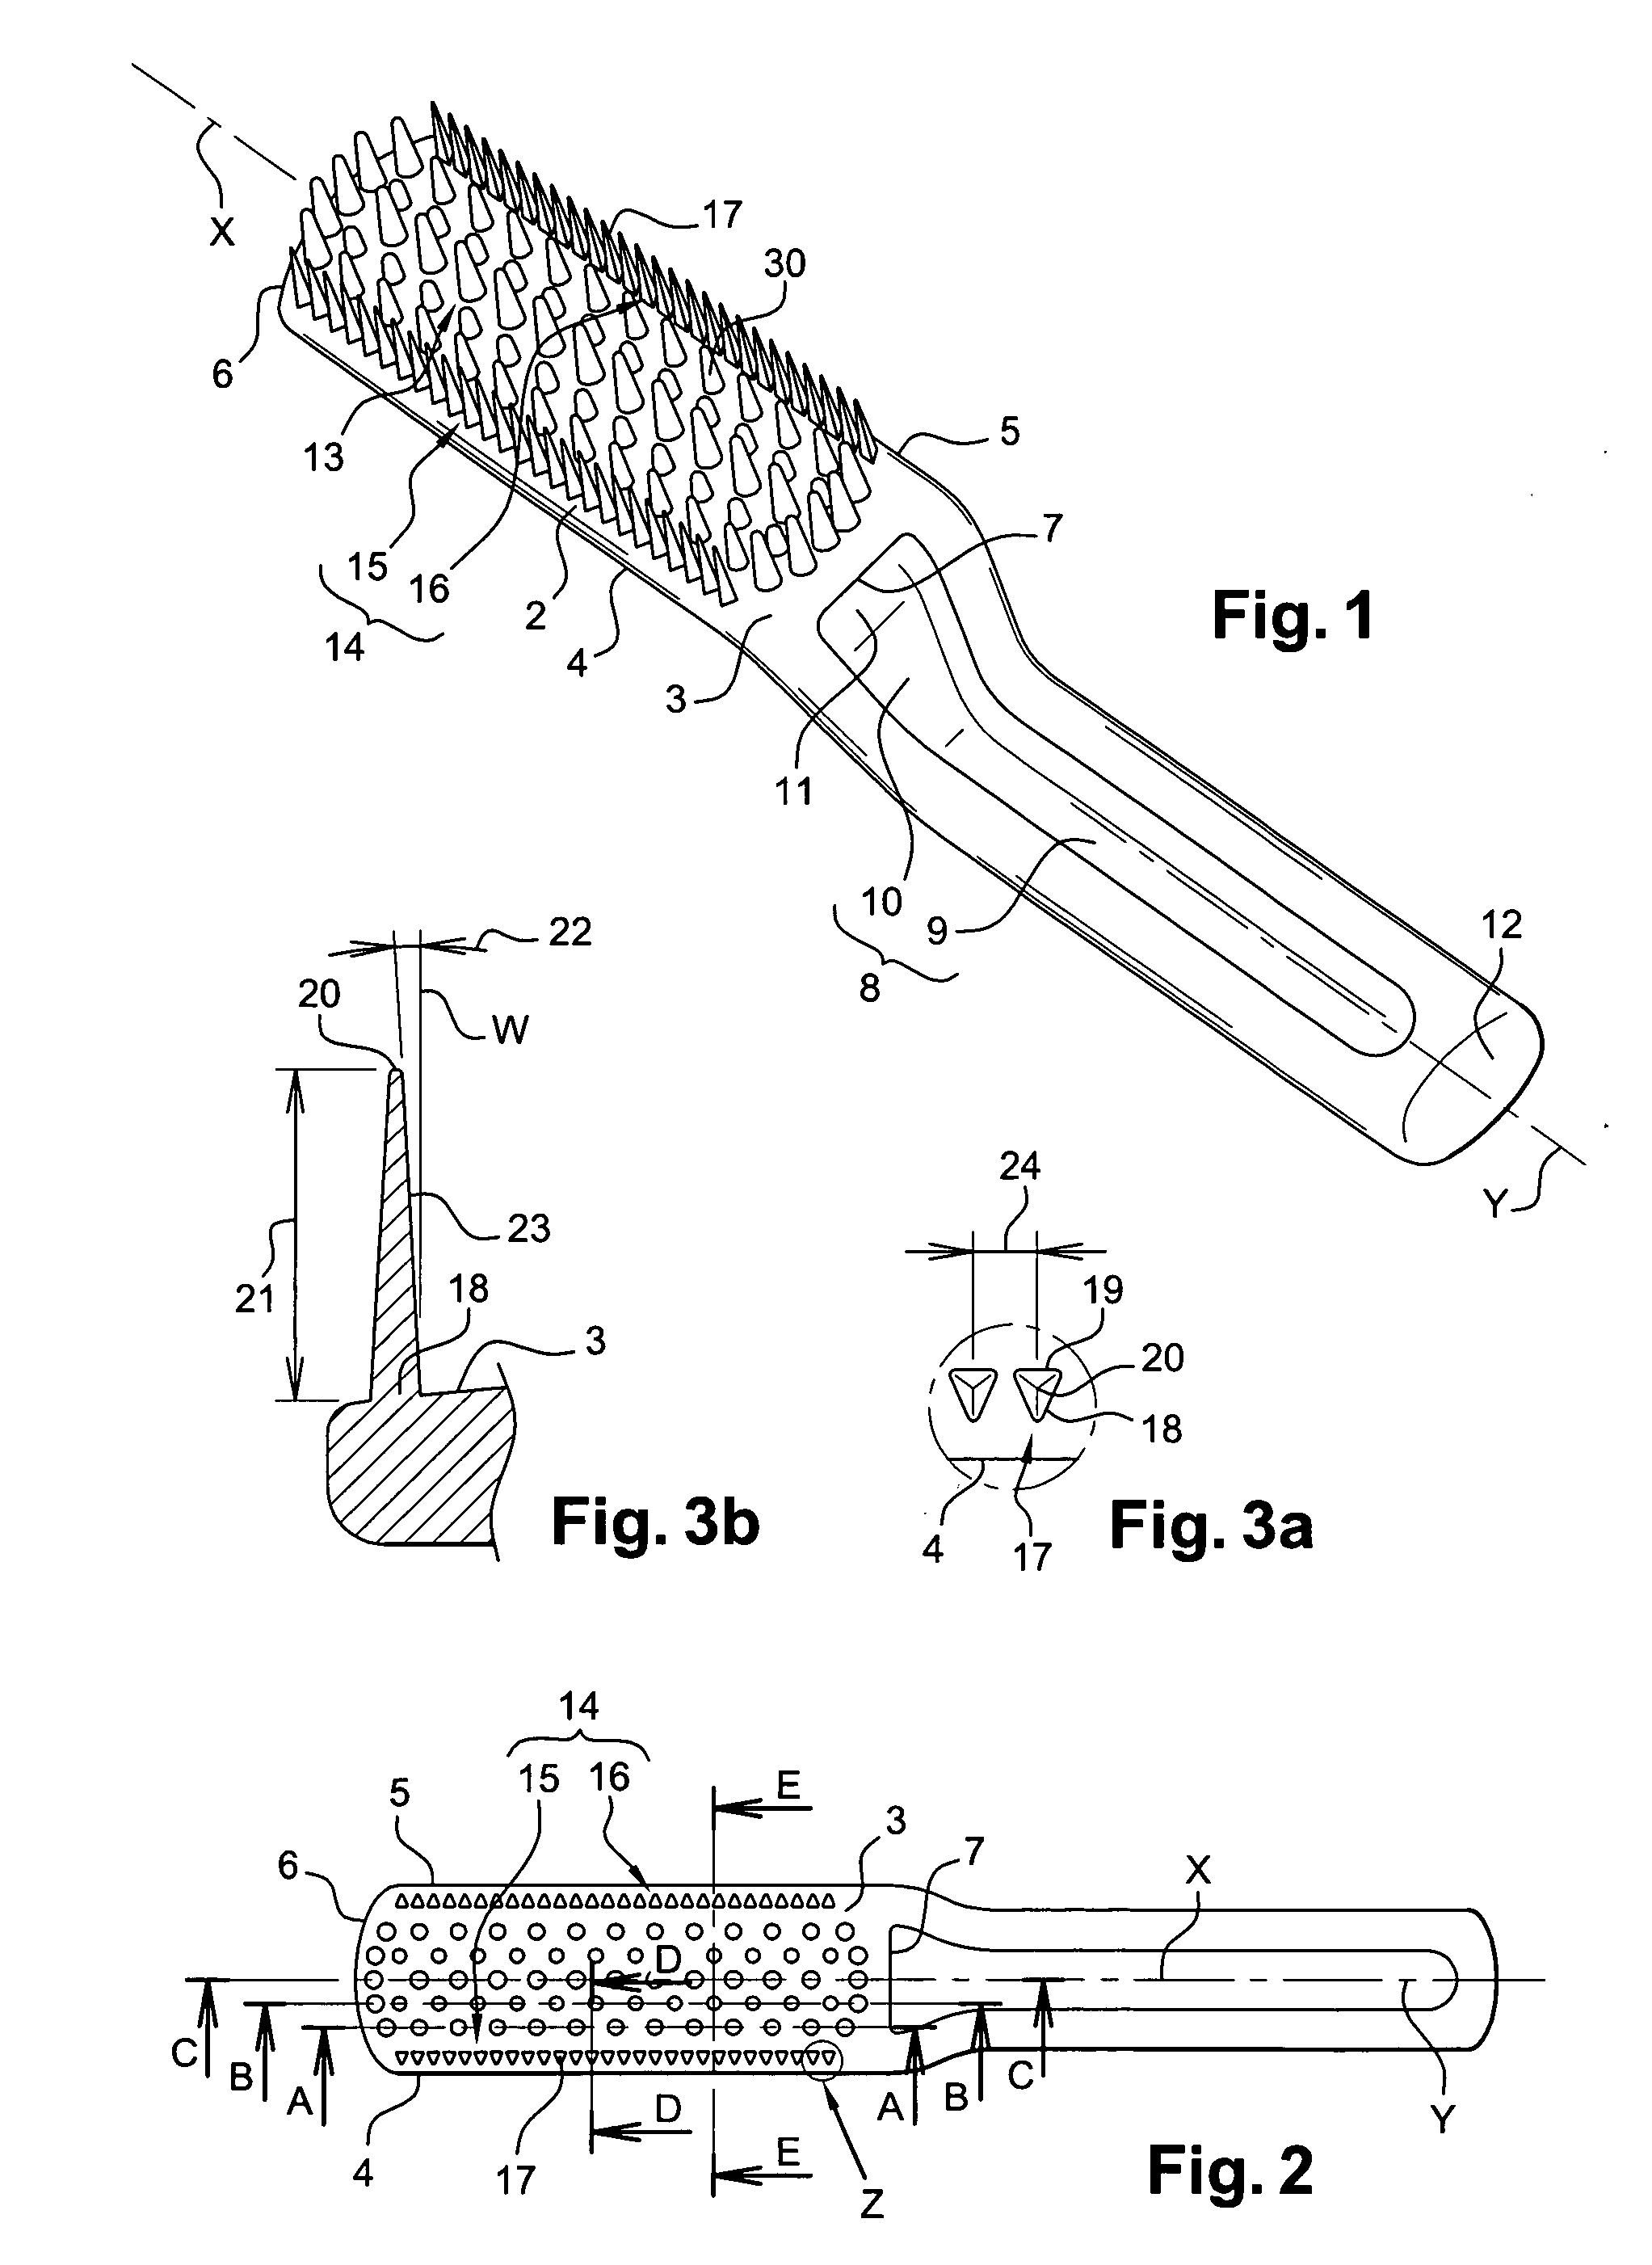 Device for applying a hair product